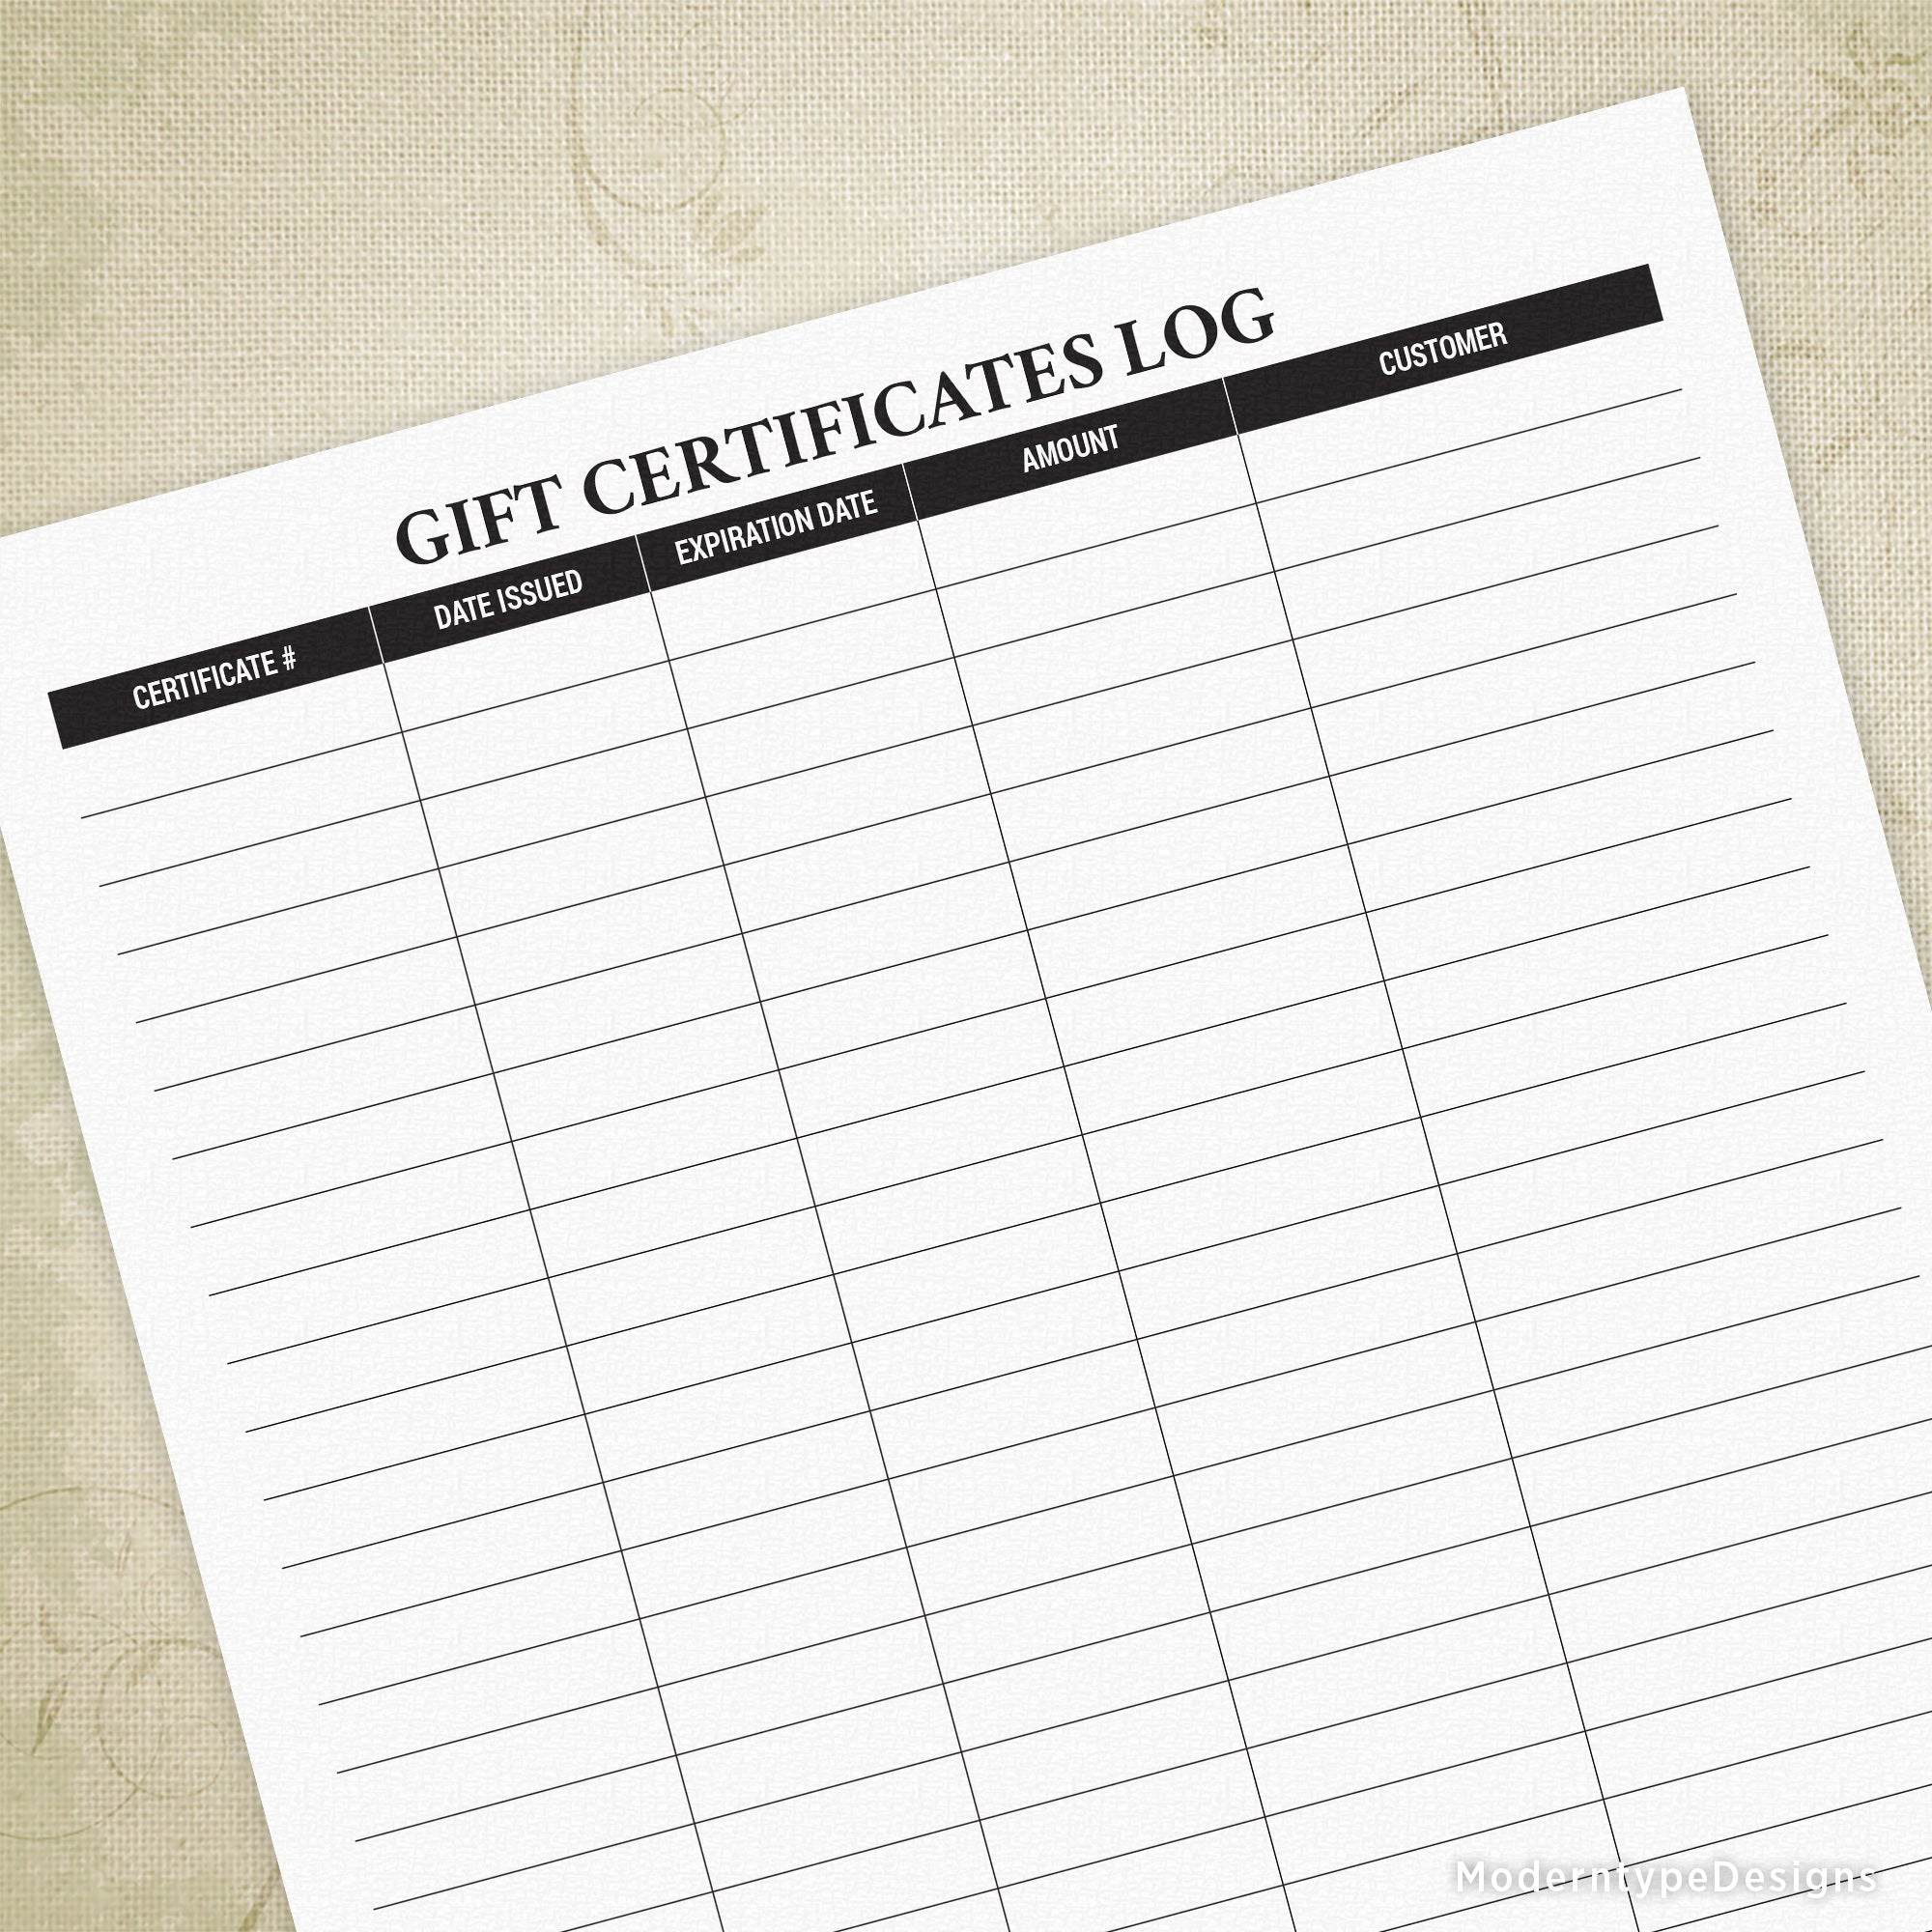 Gift Certificates Log Printable Intended For Gift Certificate Log Template